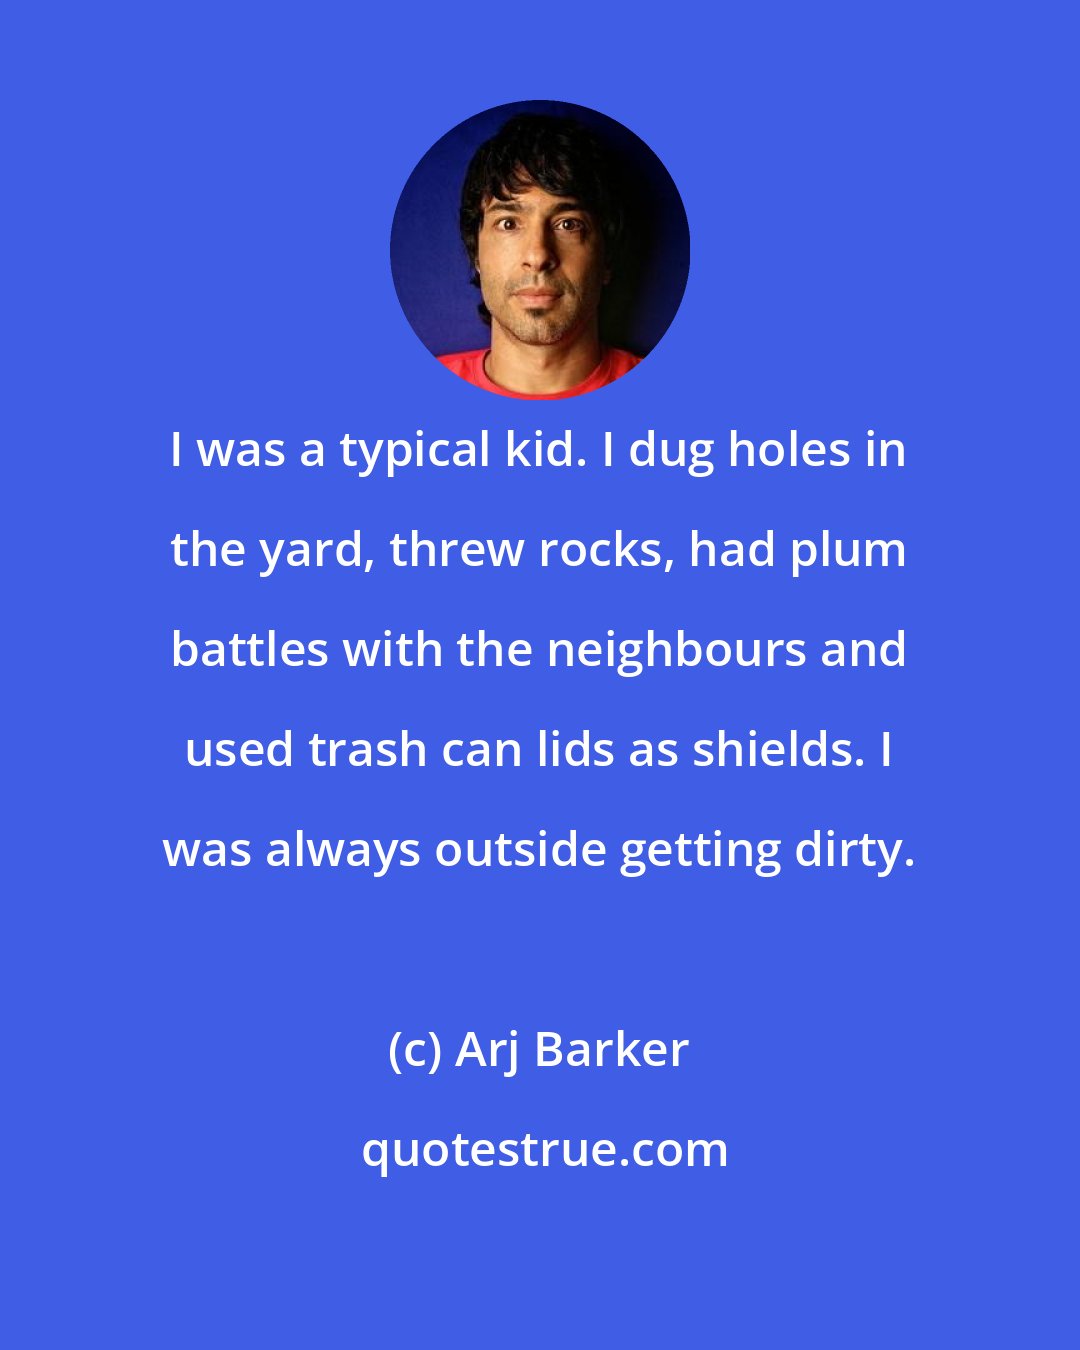 Arj Barker: I was a typical kid. I dug holes in the yard, threw rocks, had plum battles with the neighbours and used trash can lids as shields. I was always outside getting dirty.